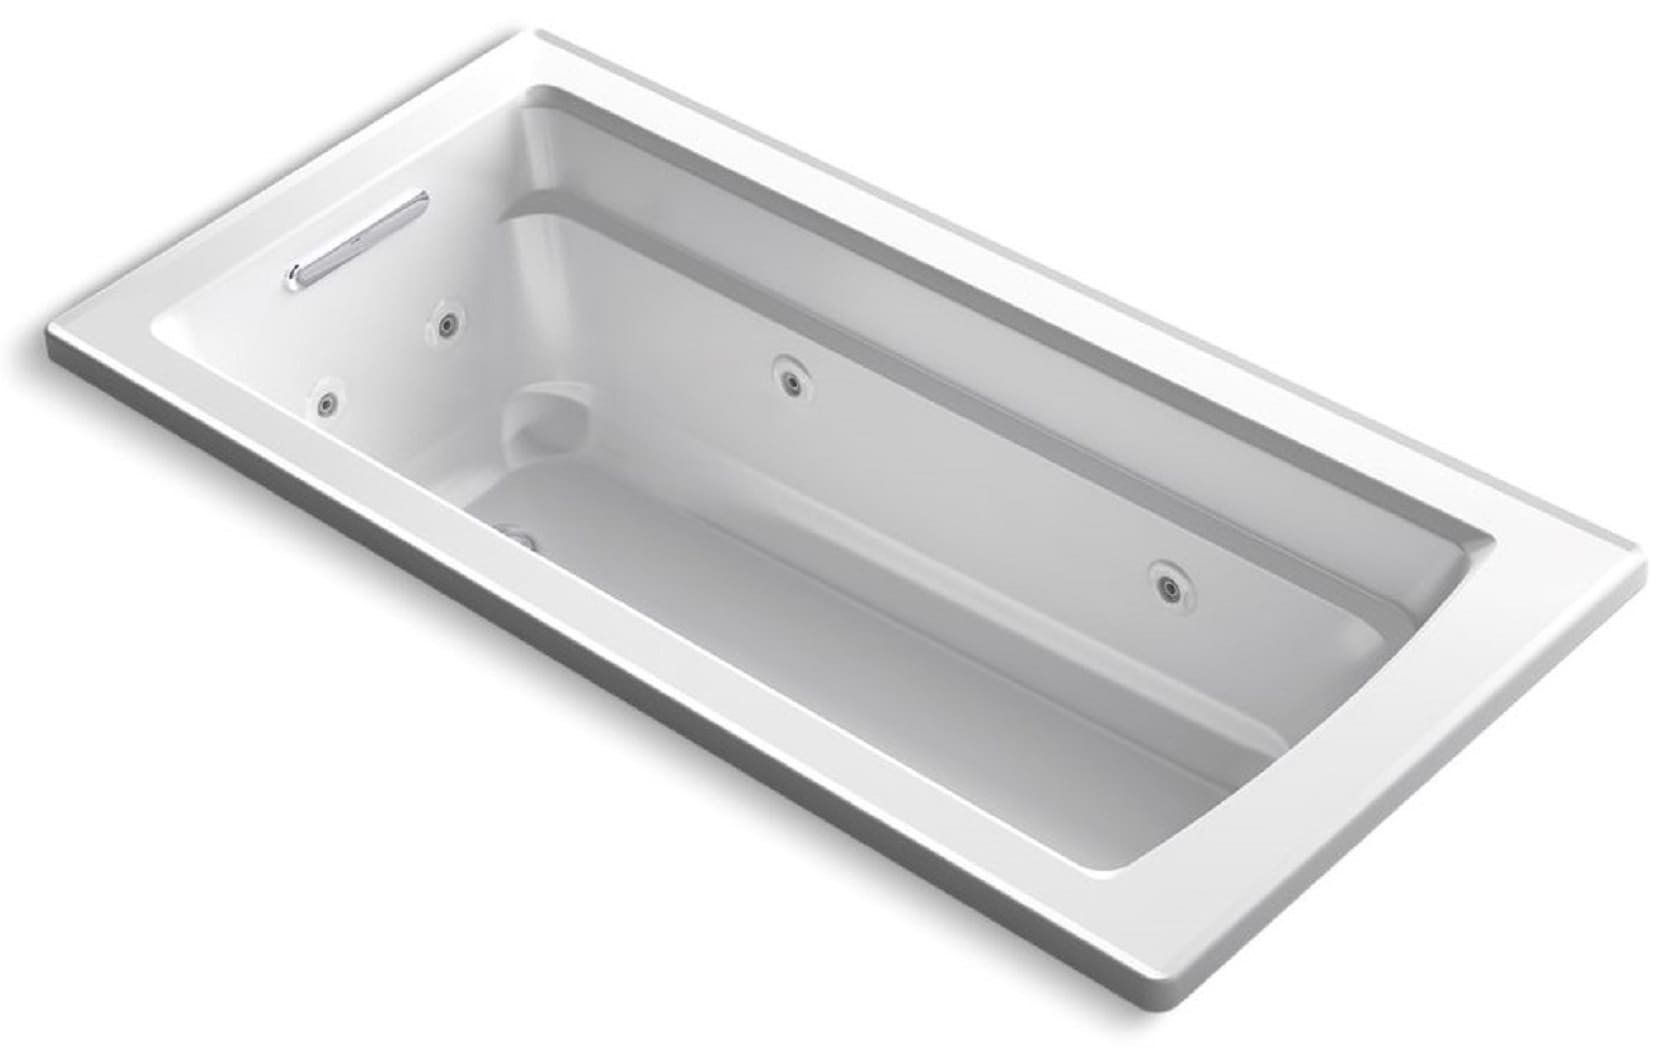 Archer Colelction K-1949-W1-0 66"" Drop-In Whirlpool Bathtub Includes 8 HydroMassage Jets  Bask Heated Surface  Textured Bottom Surface  Slotted -  Kohler